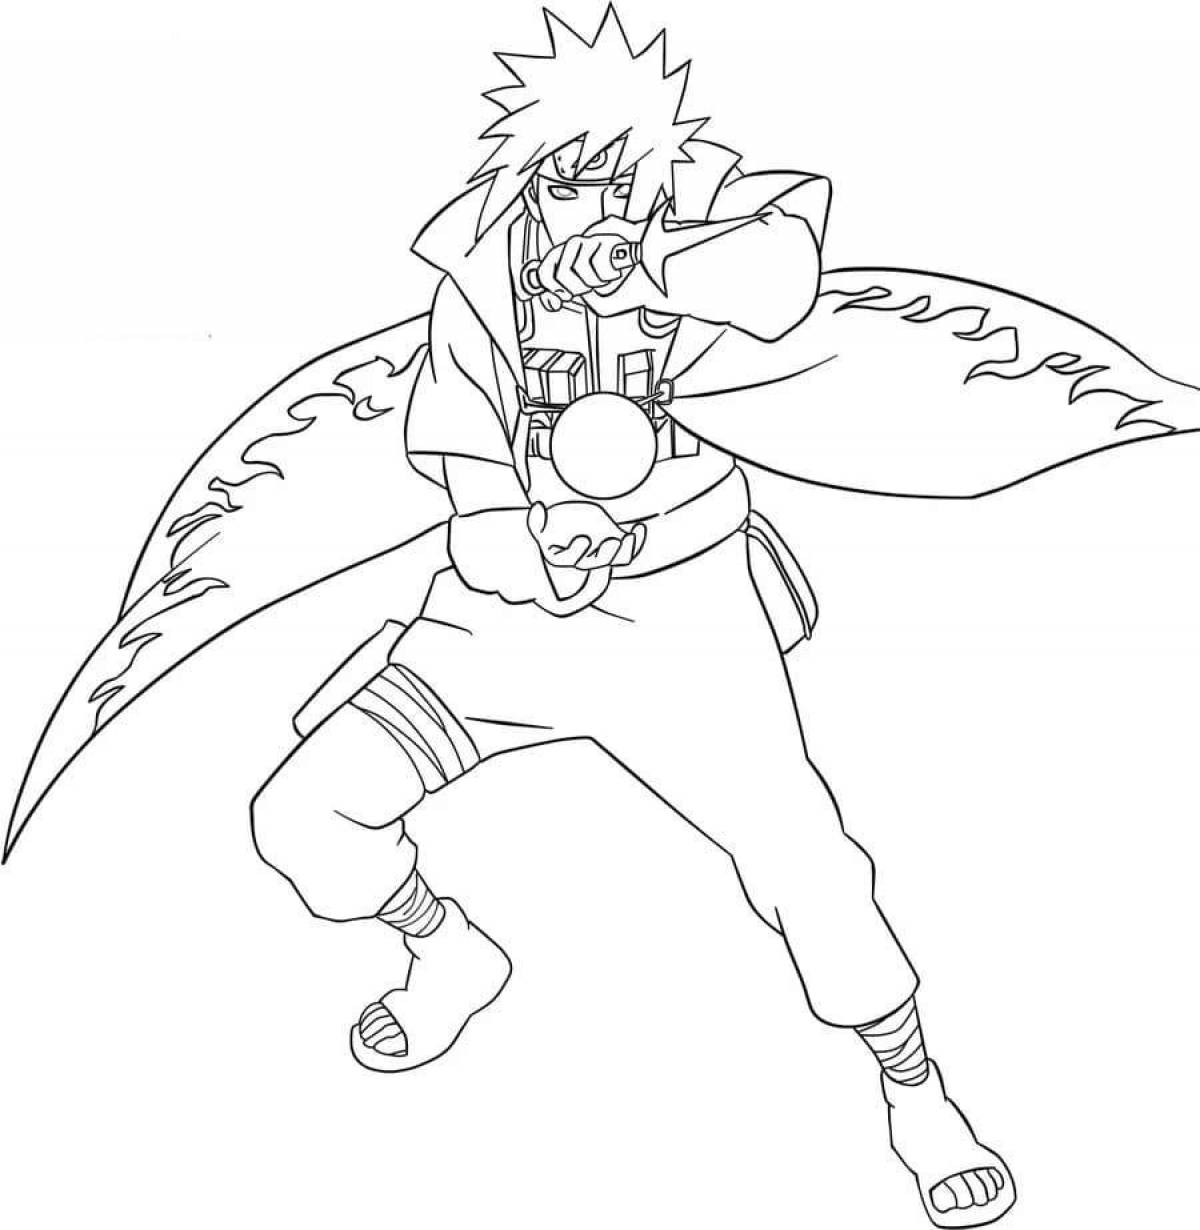 Fabulous naruto coloring pages for kids